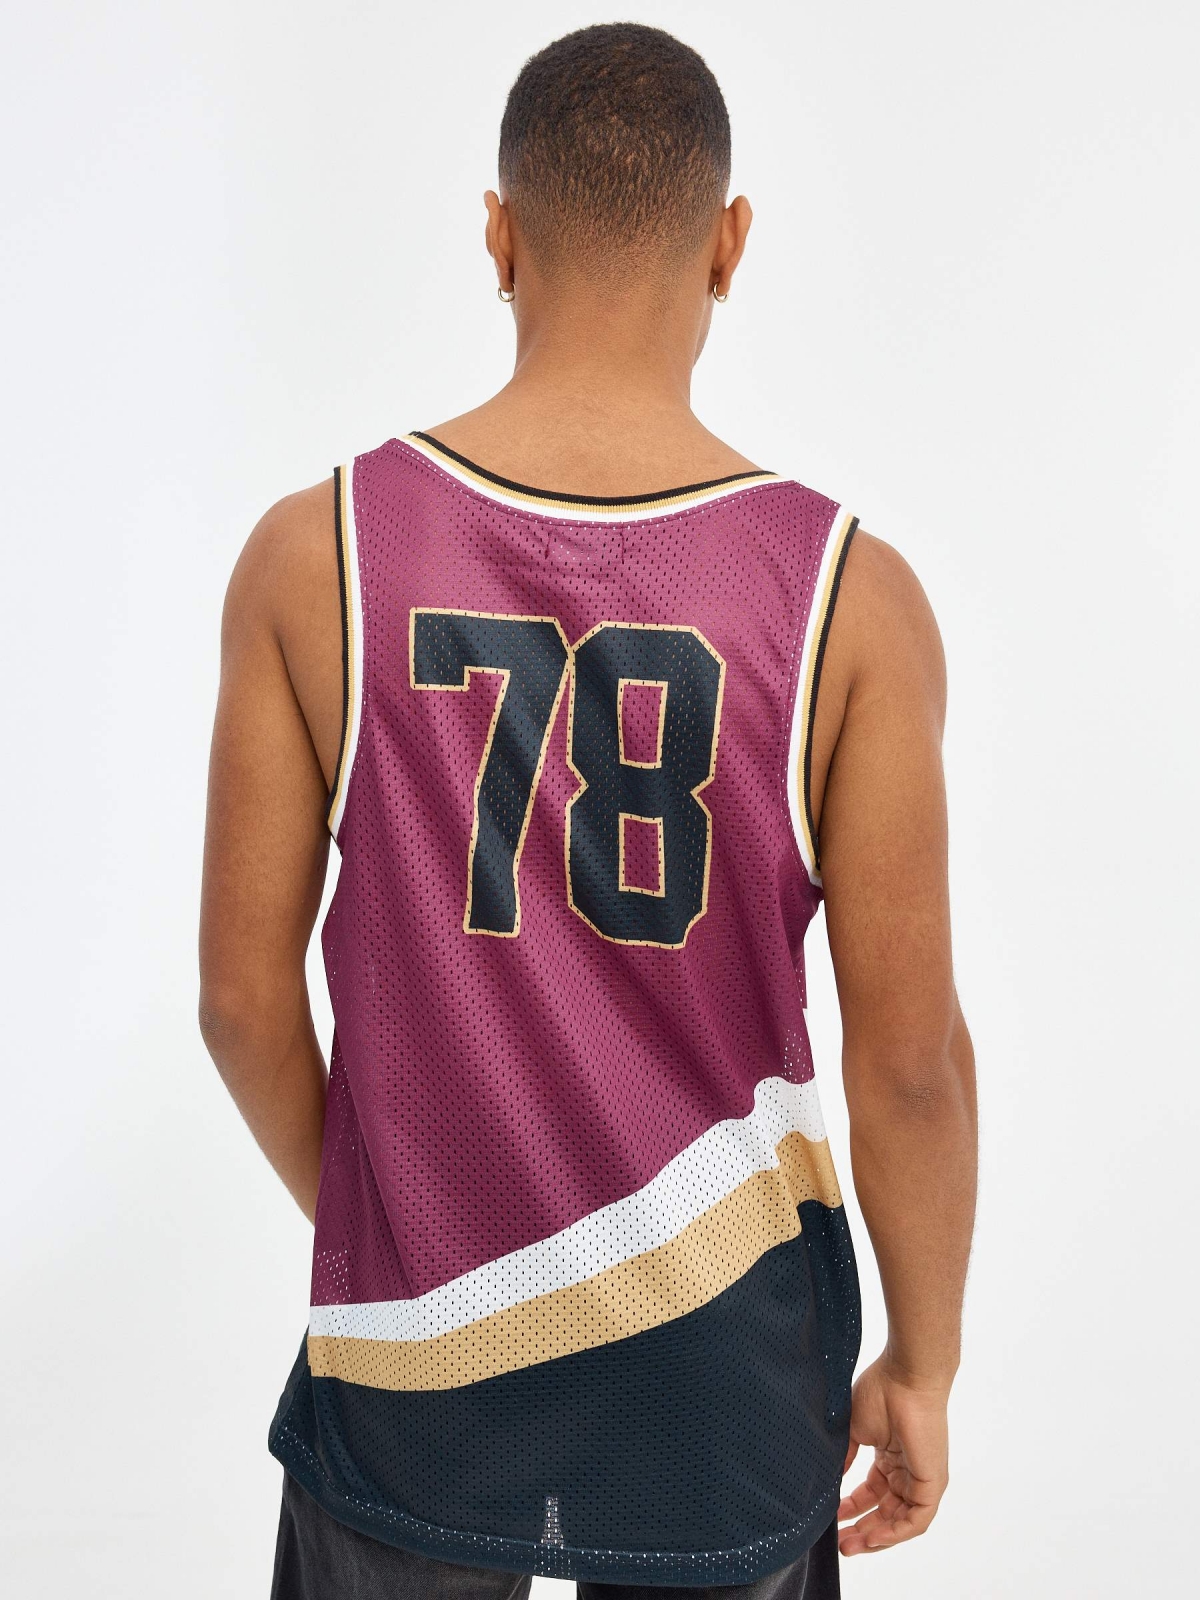 KNIGHTS sport T-shirt magenta middle back view